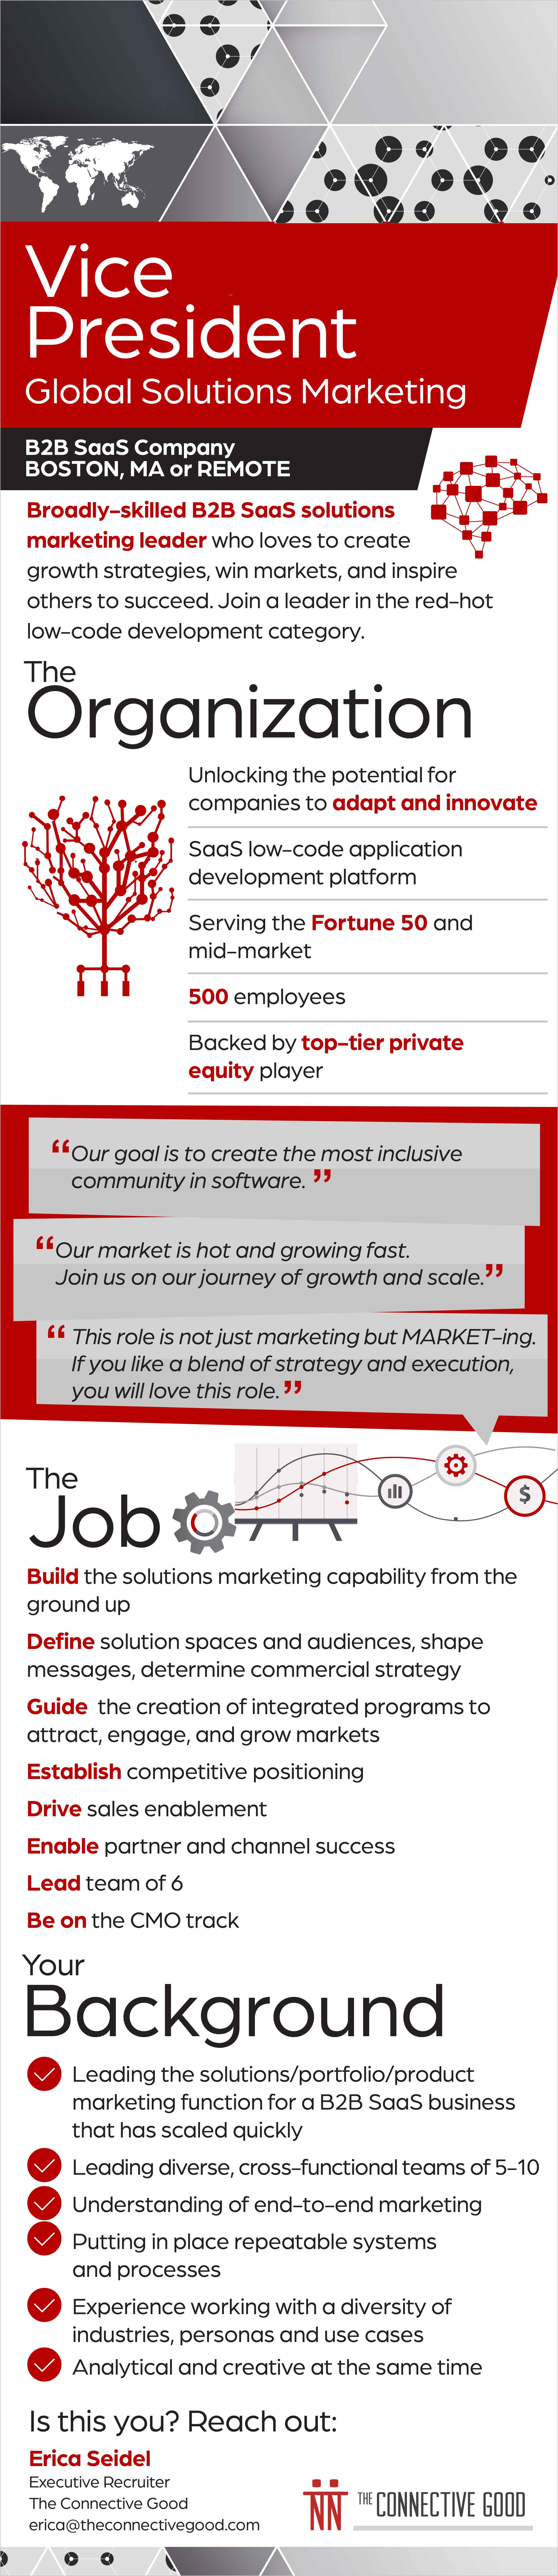 Infographic - VP of Global Solutions Marketing